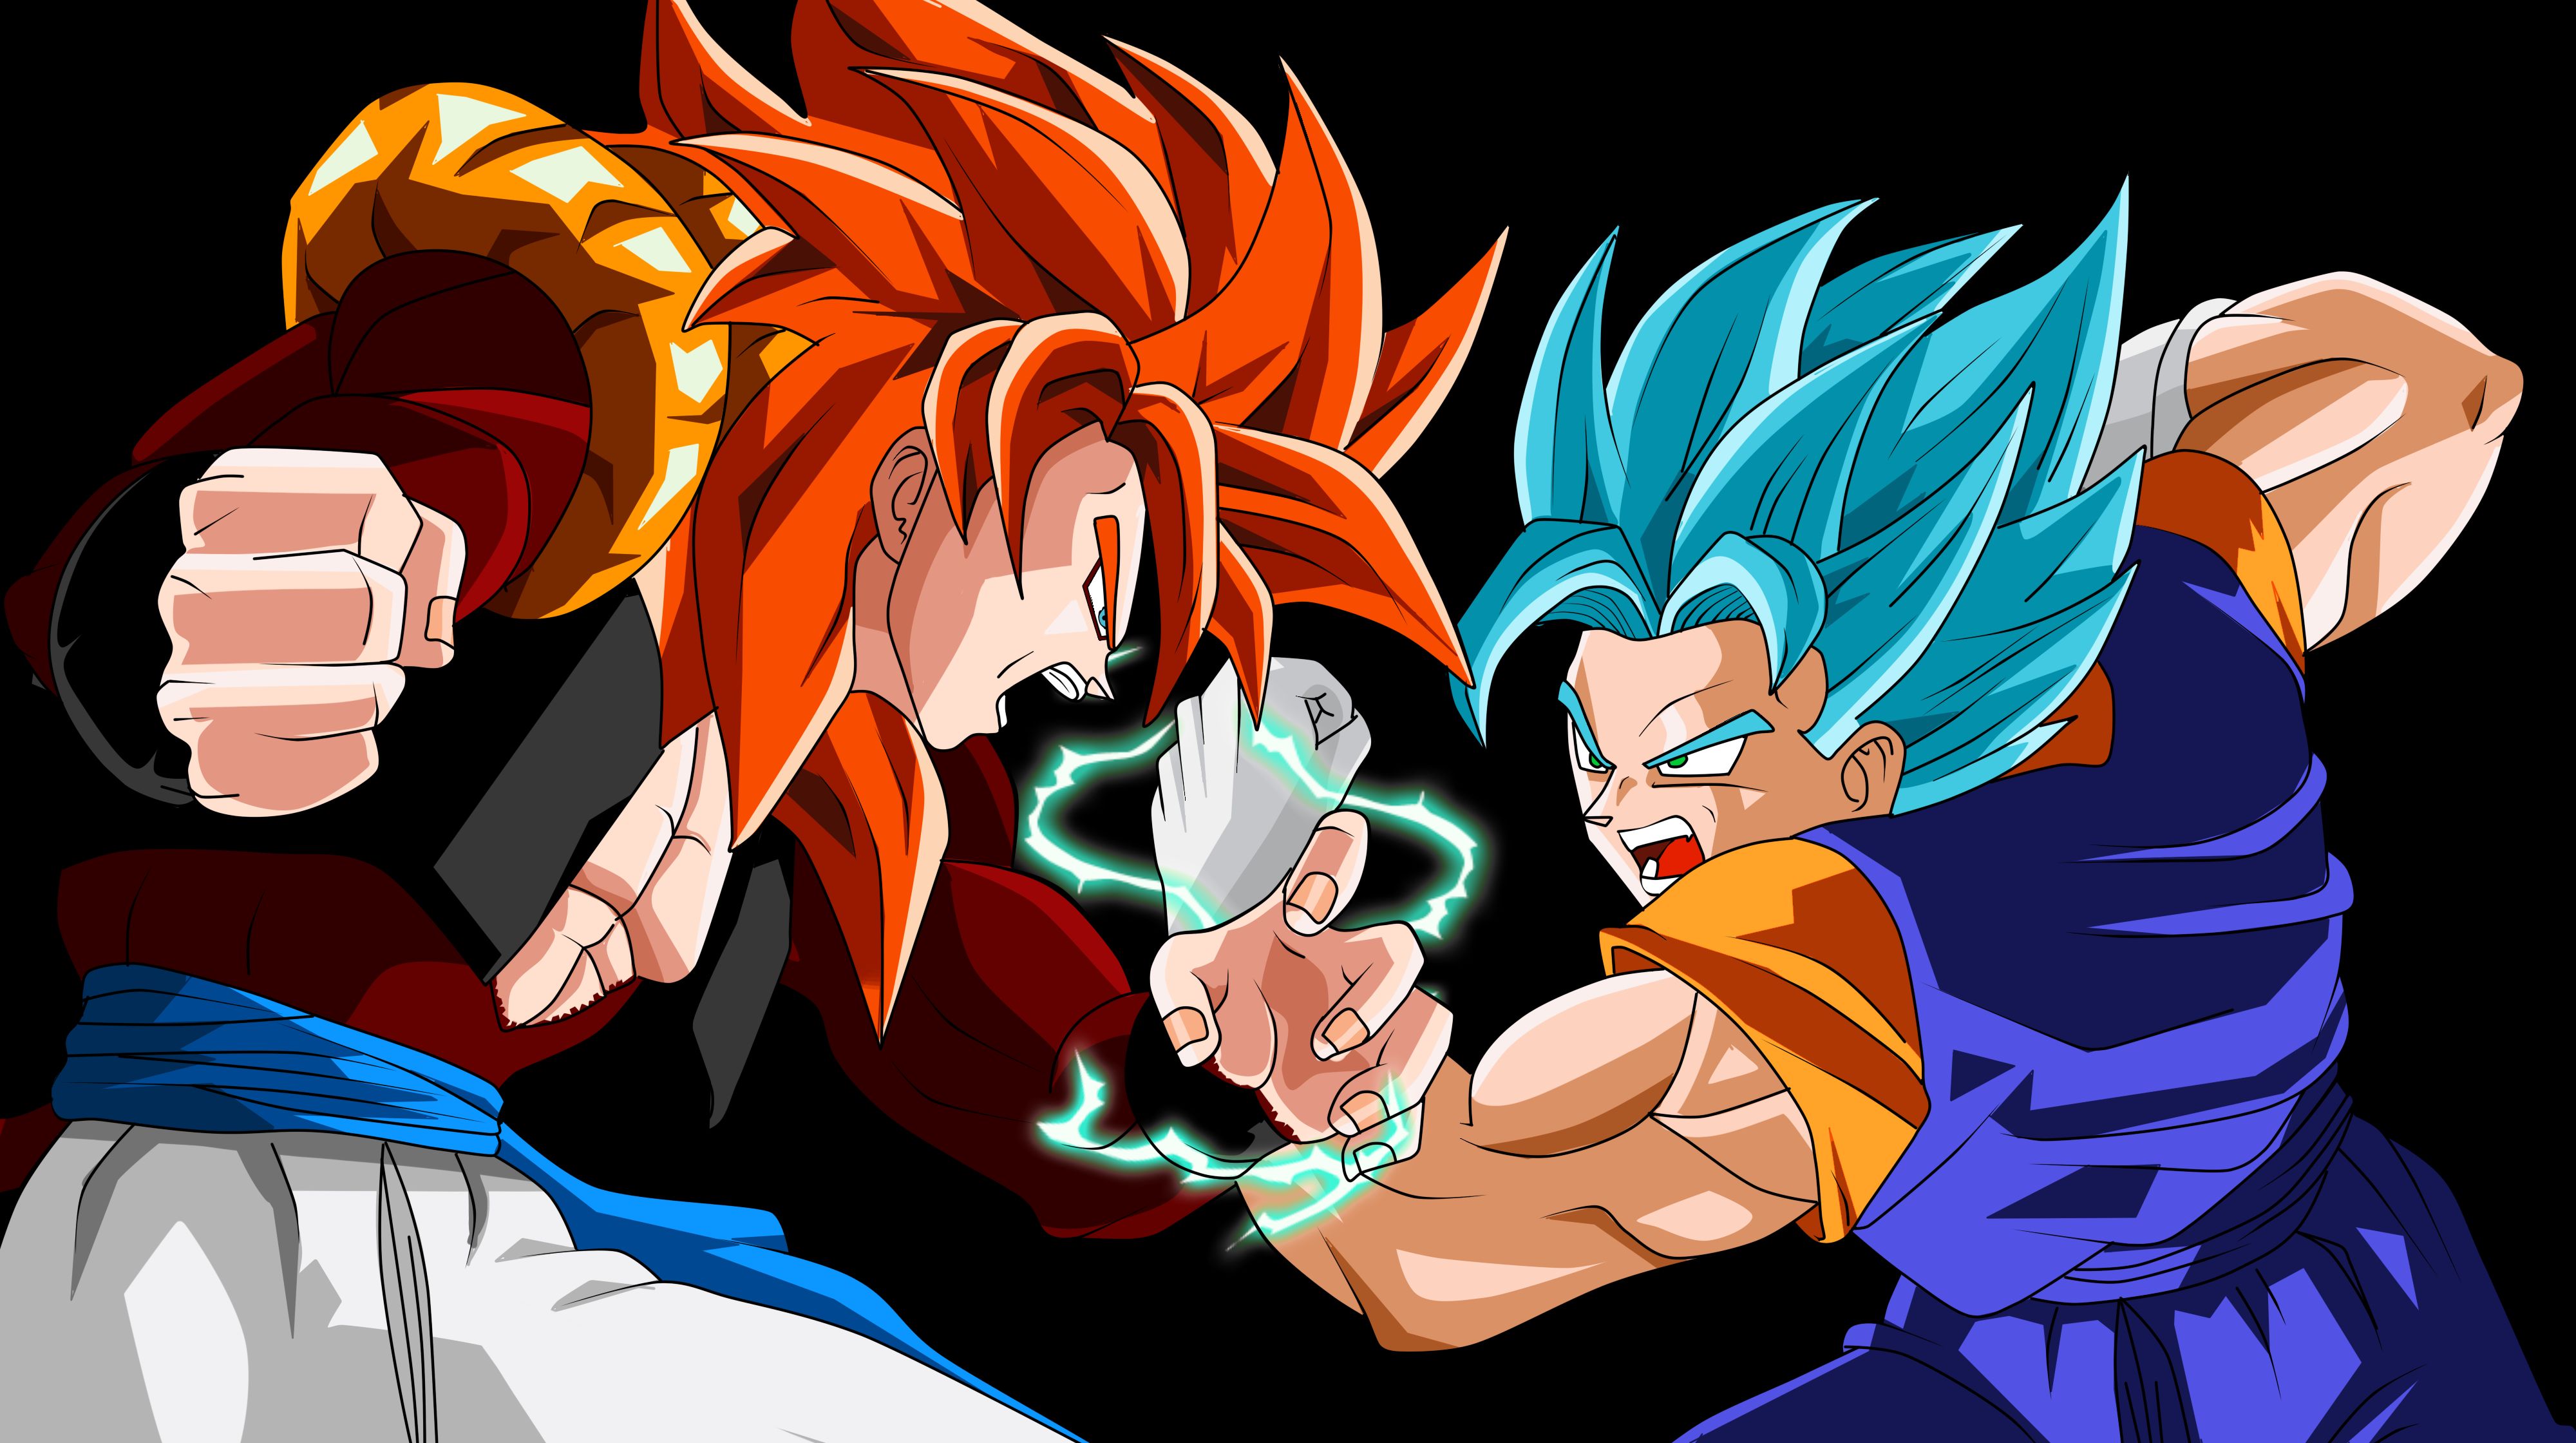 Gogeta and vegito aesthetic Wallpapers Download